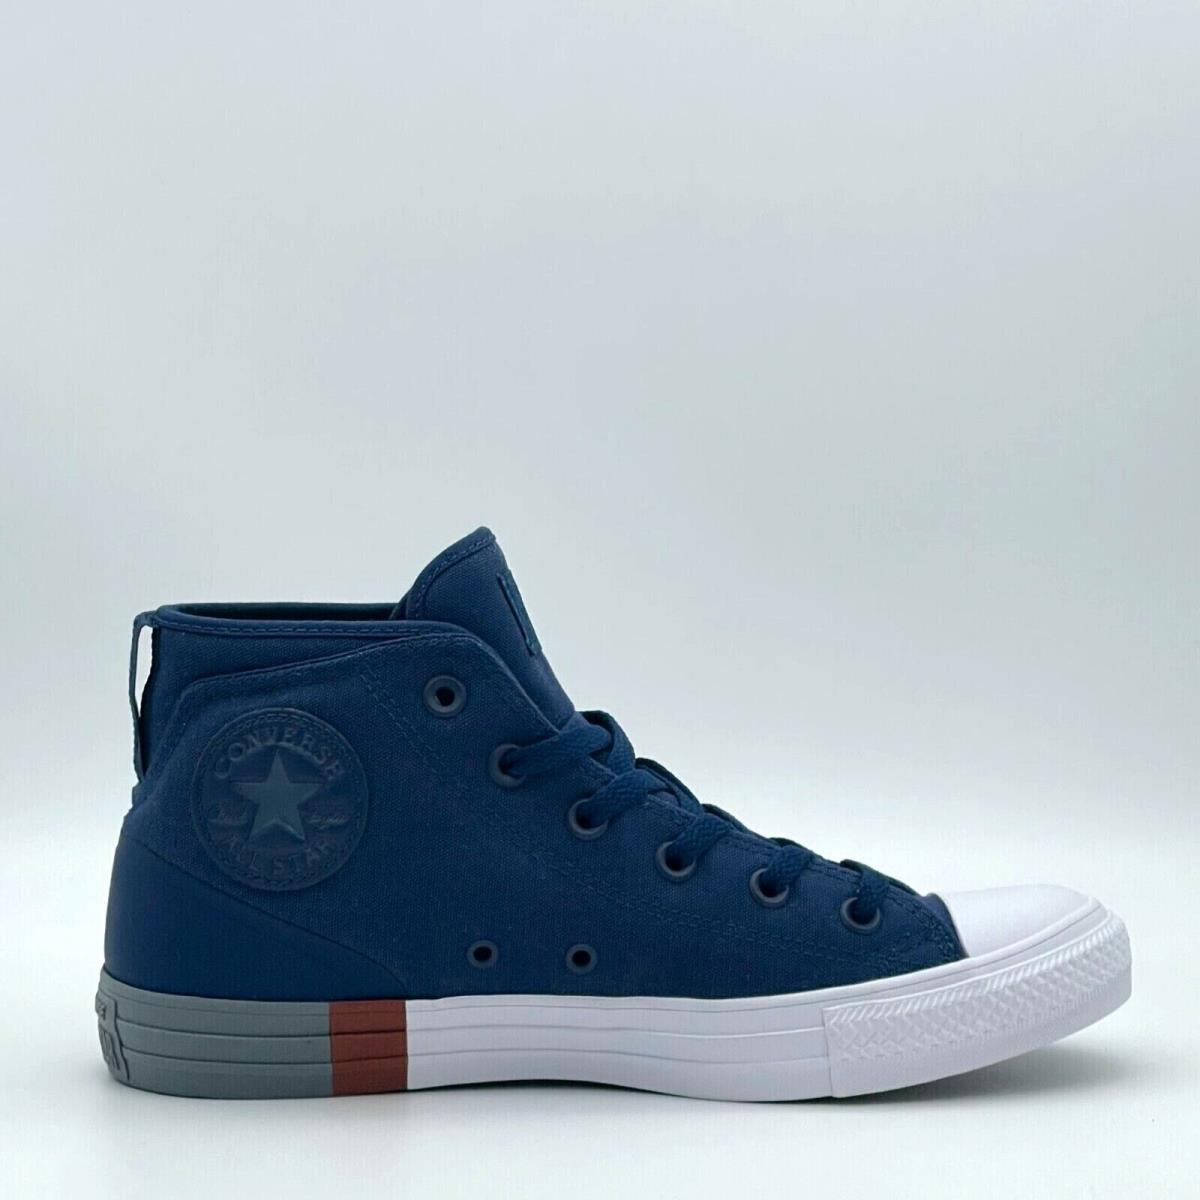 Converse Chuck Taylor All Star Syde Street Mid Navy White - Men`s Shoes 159553C